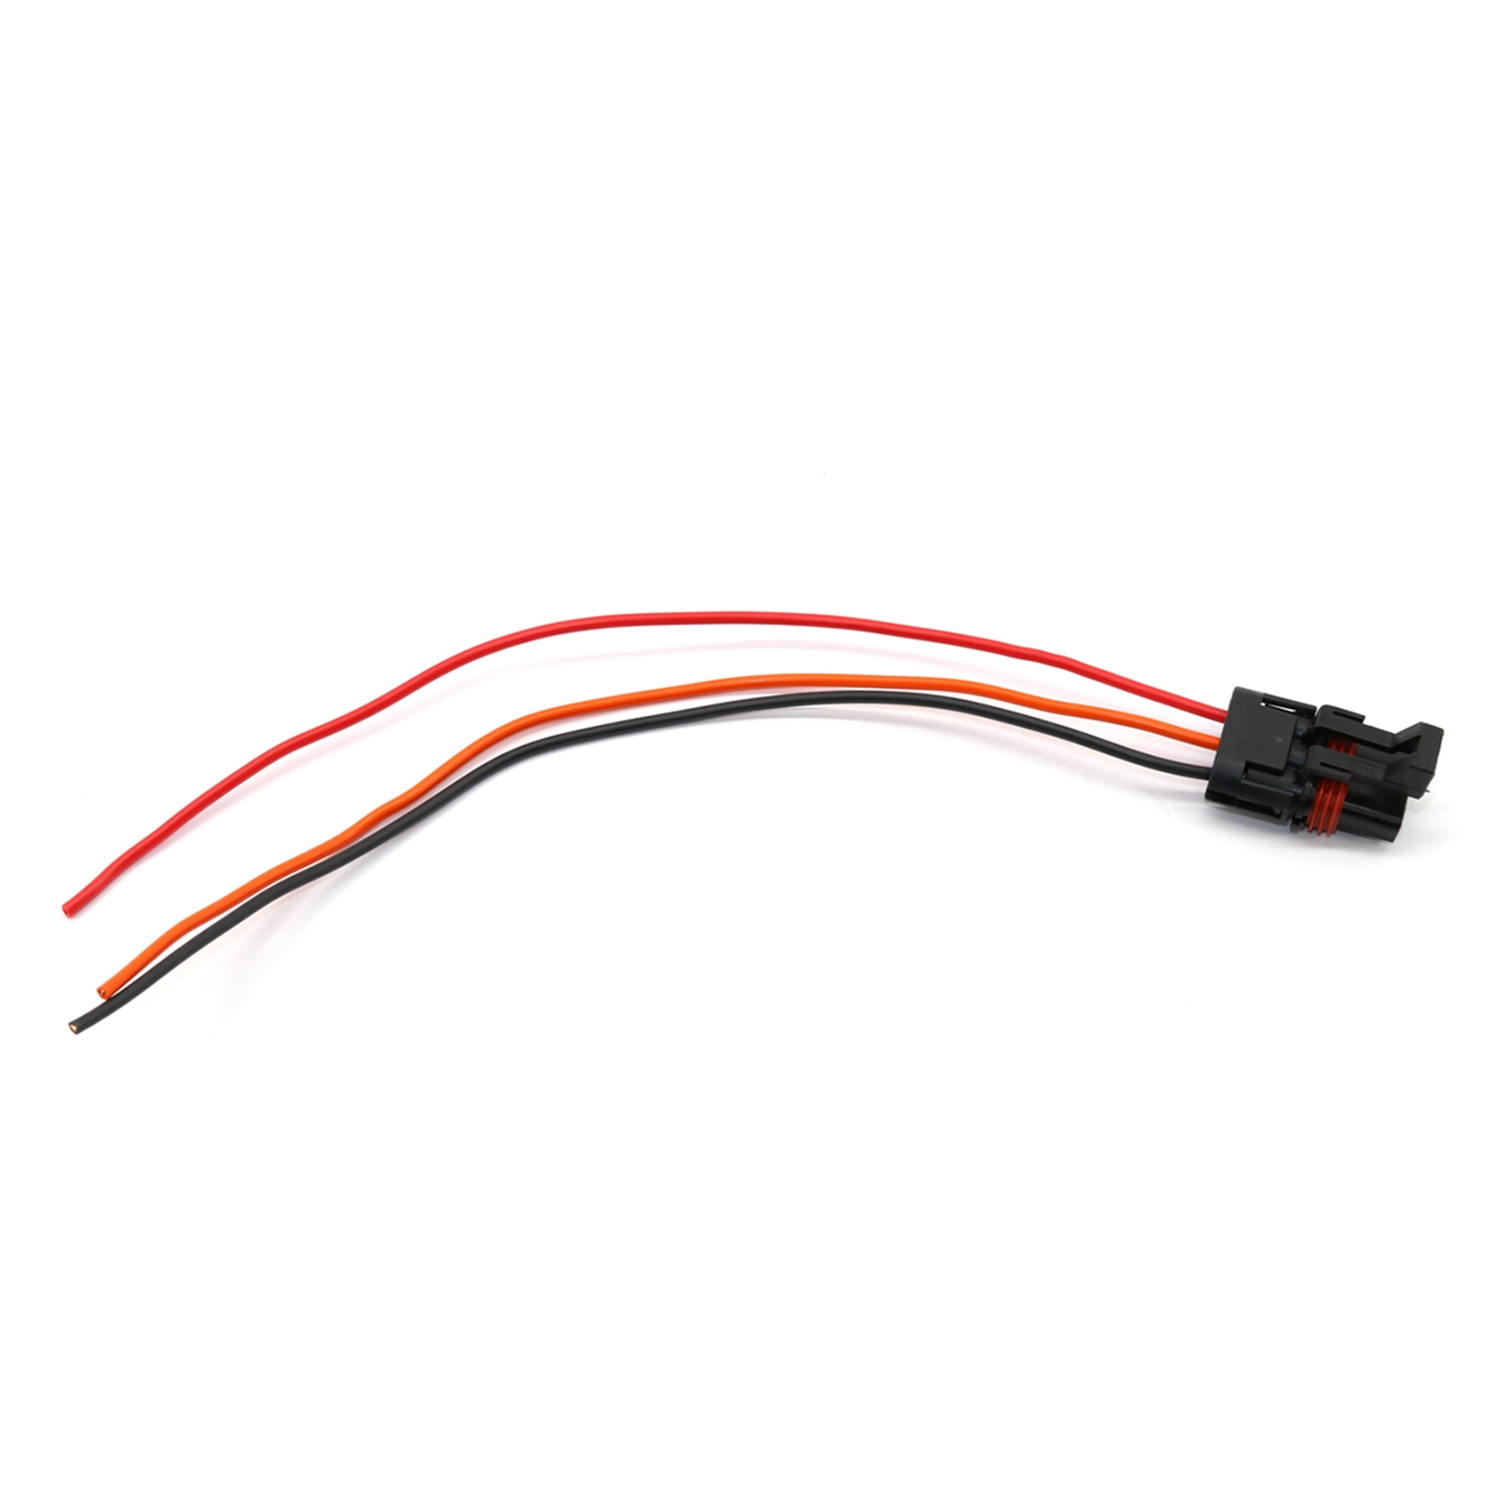 xtc power products polaris pulse busbar accessory wiring harness with 14 gauge 12v ign gnd wires